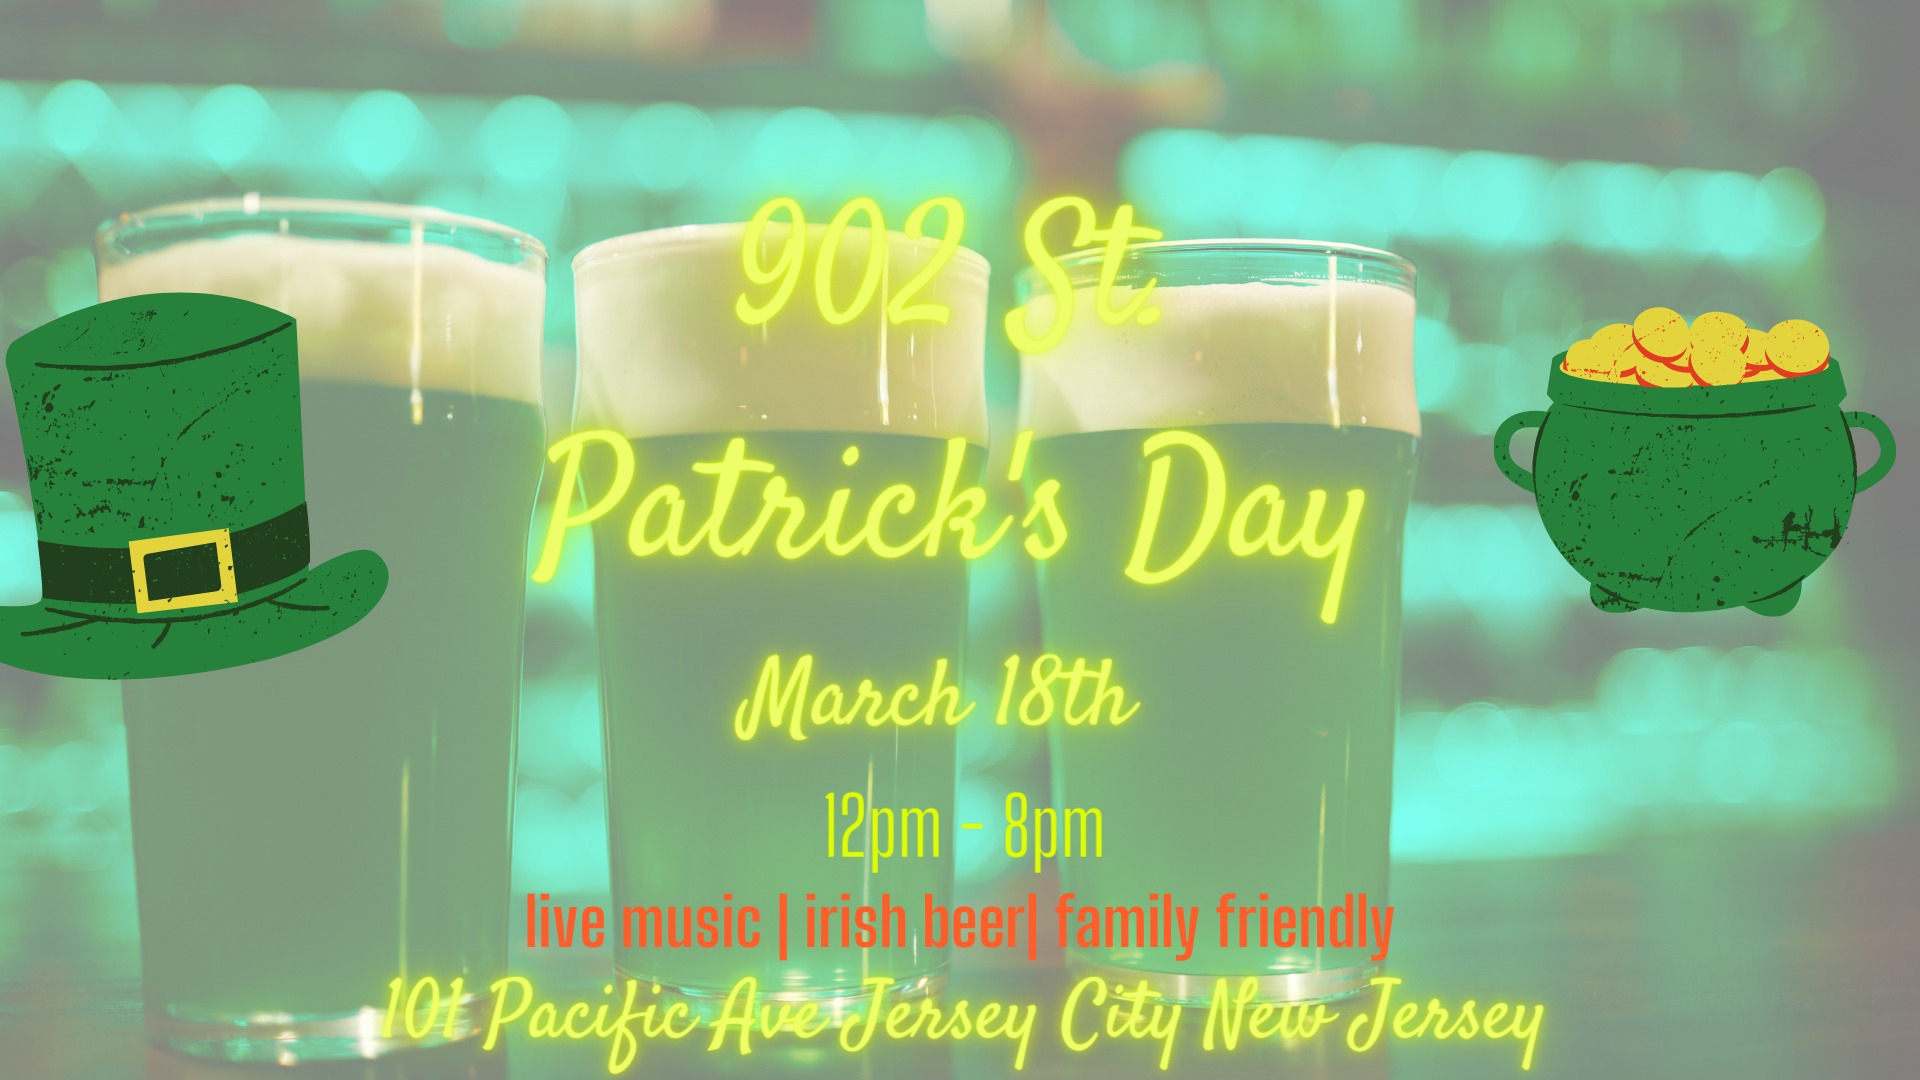 902 St Patrick's Day, March 18th 12pm - 8pm, 101 Pacific Ave jersey City